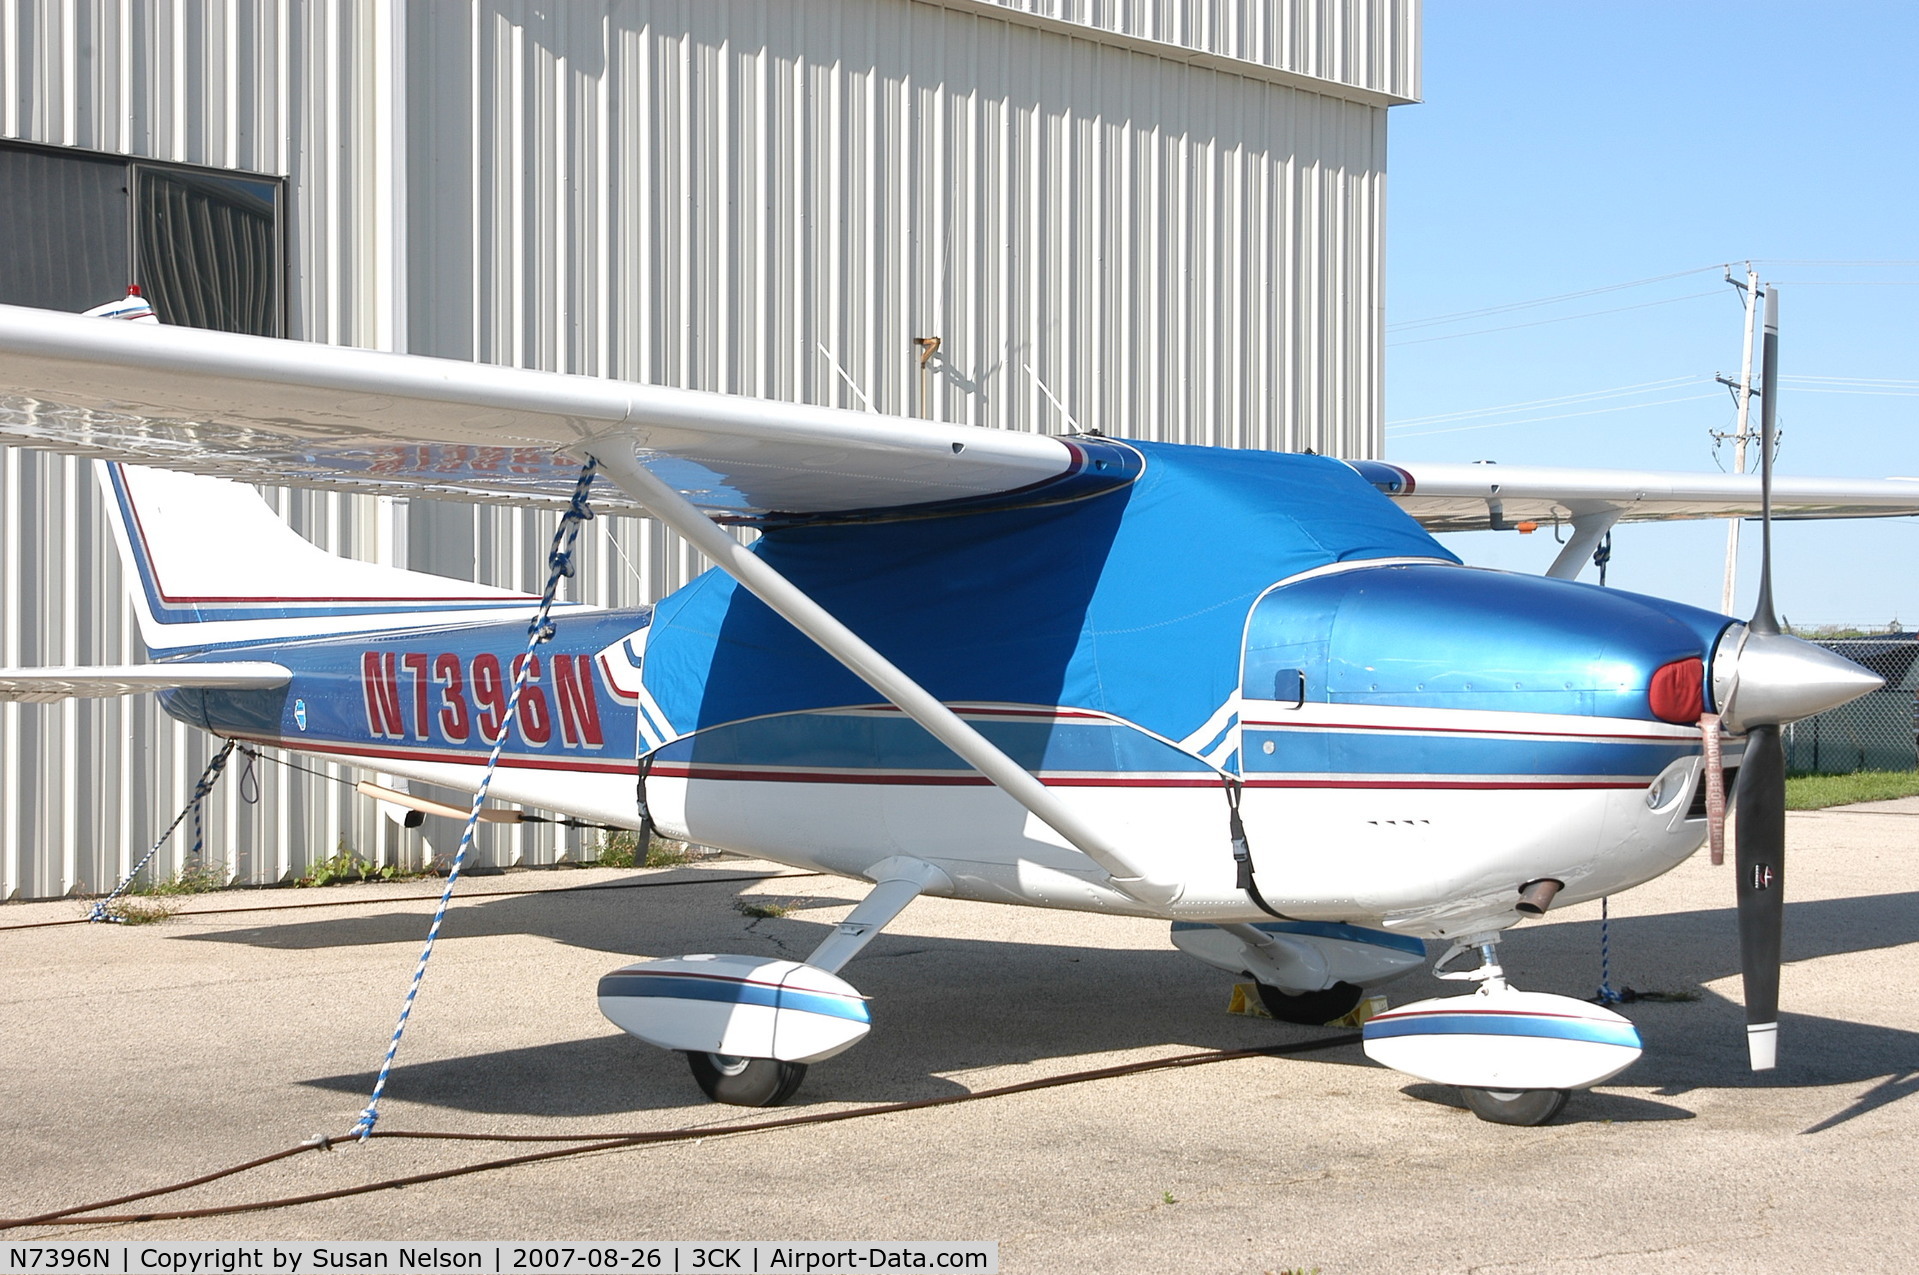 N7396N, 1974 Cessna 182P Skylane C/N 18263179, I owned this awesome aircraft for 10 years. Loved it!